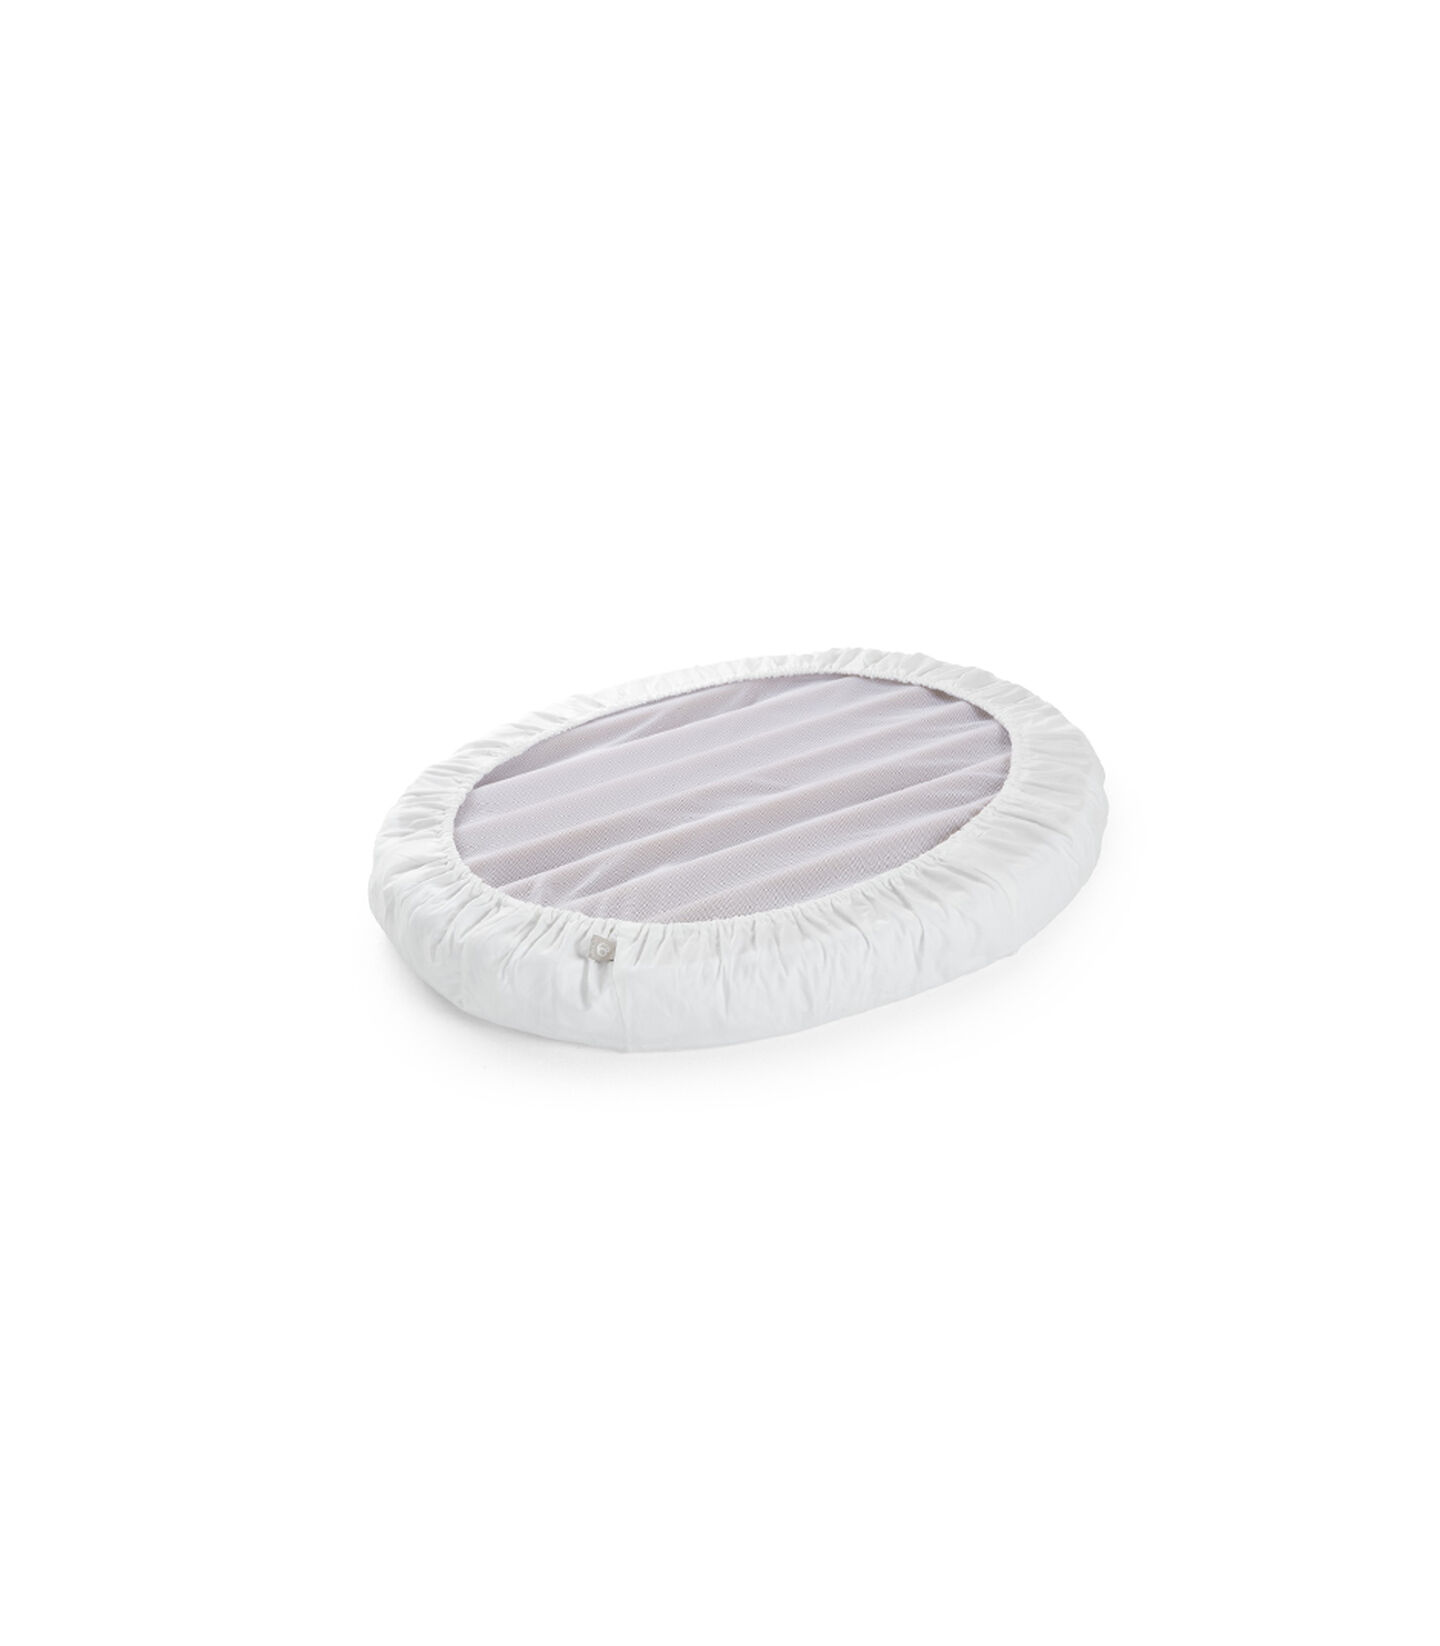 Stokke® Sleepi™ Mini Fitted Sheet Белый, Белый, mainview view 2